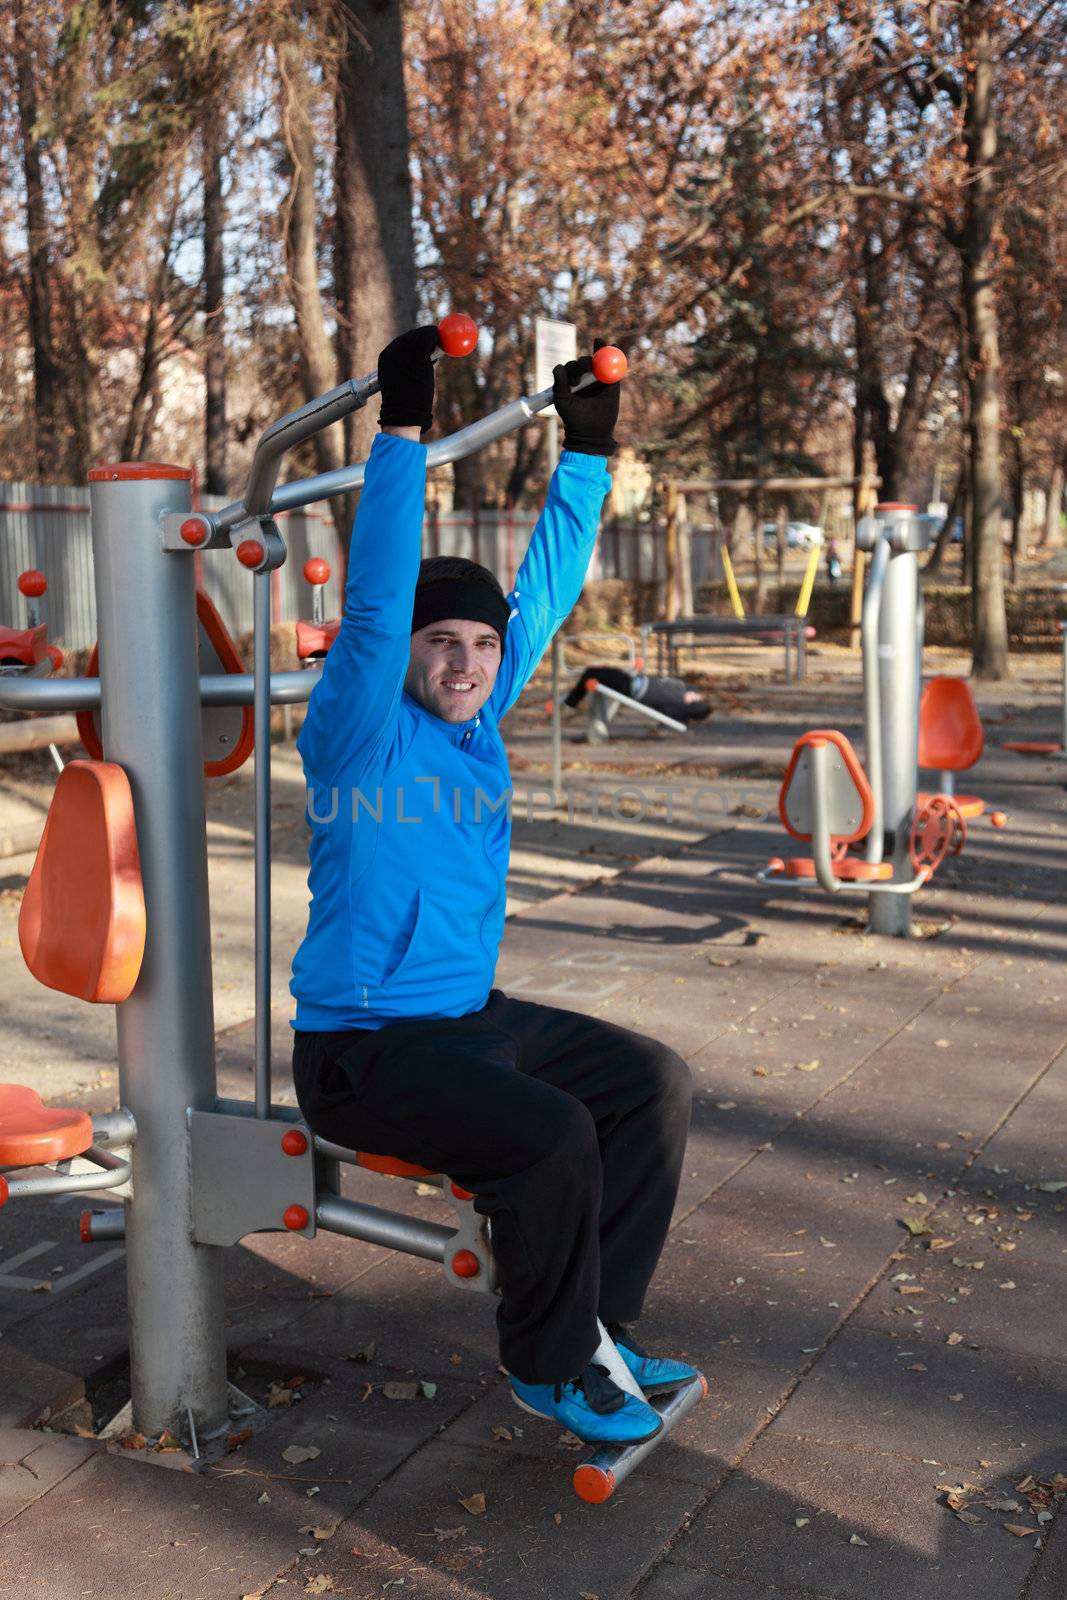 Man doing exercise outdoors in a public park.